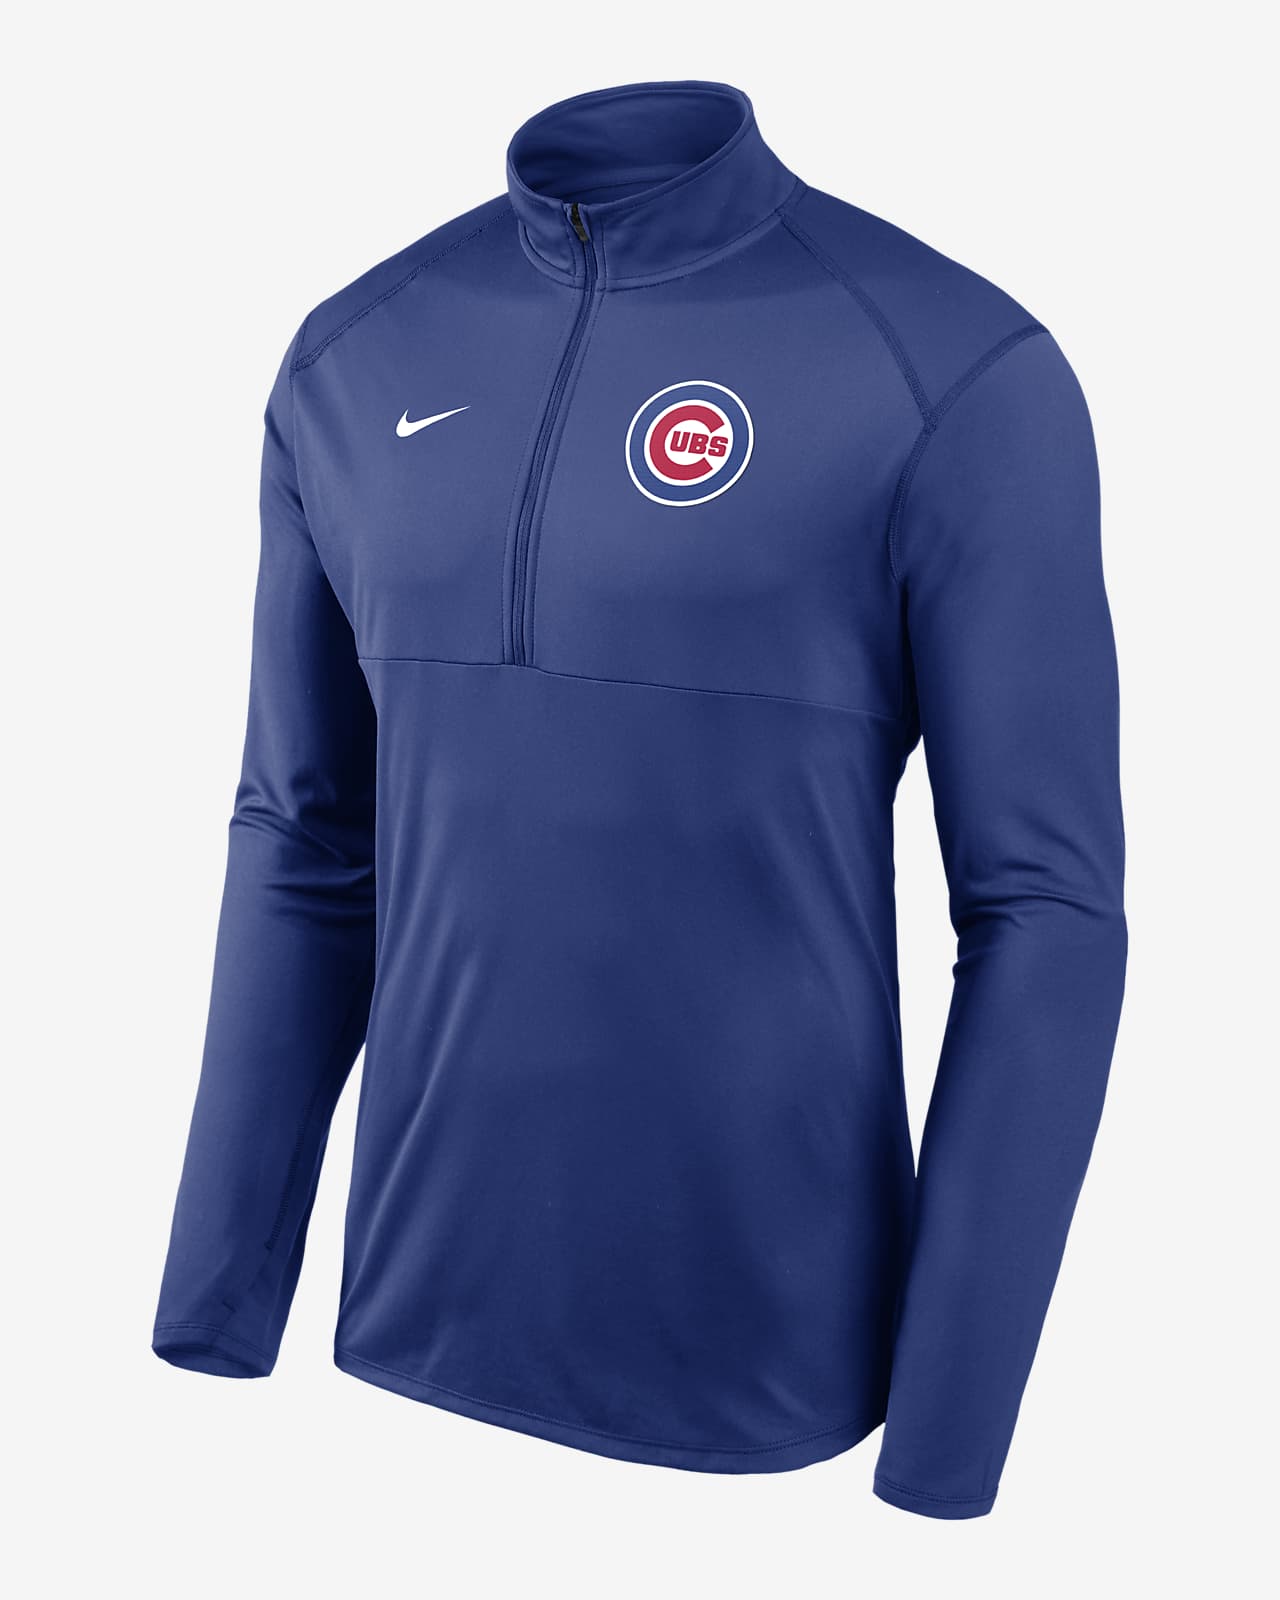 Nike Dri-FIT Element Performance (MLB Chicago Cubs) Men’s 1/2-Zip Pullover